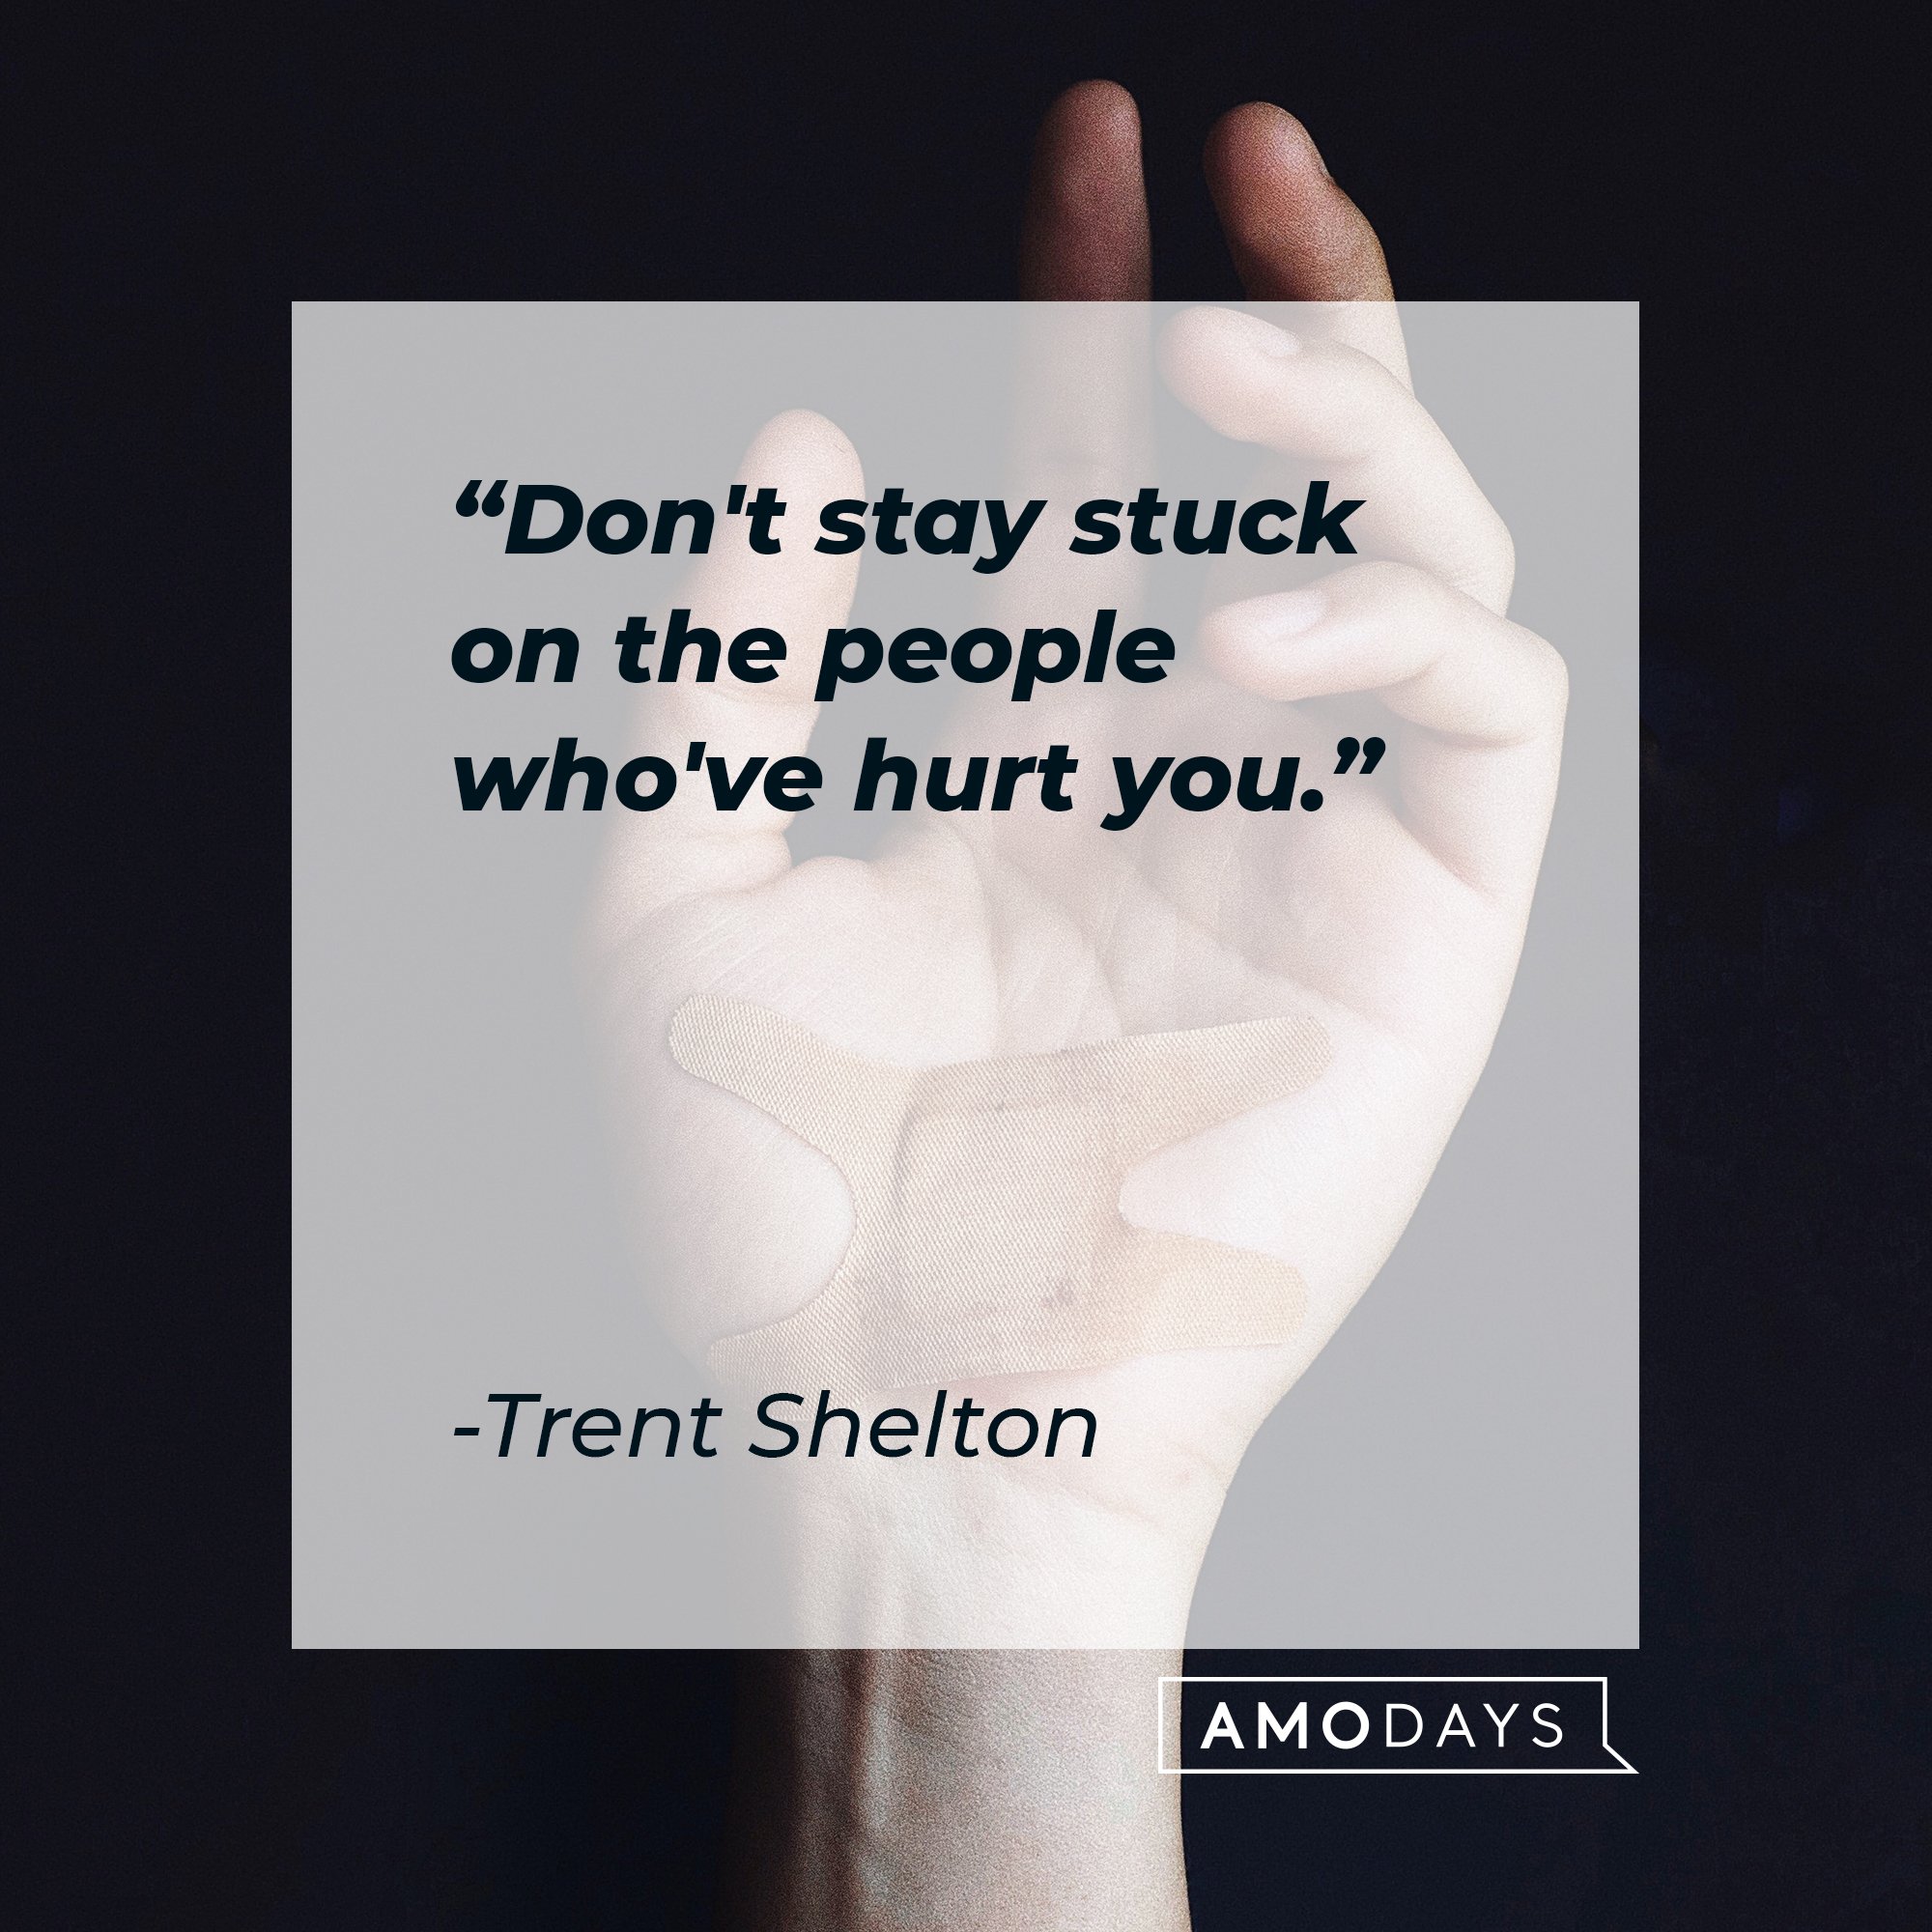  Trent Shelton's quote: "Don't stay stuck on the people who've hurt you." | Image: AmoDays